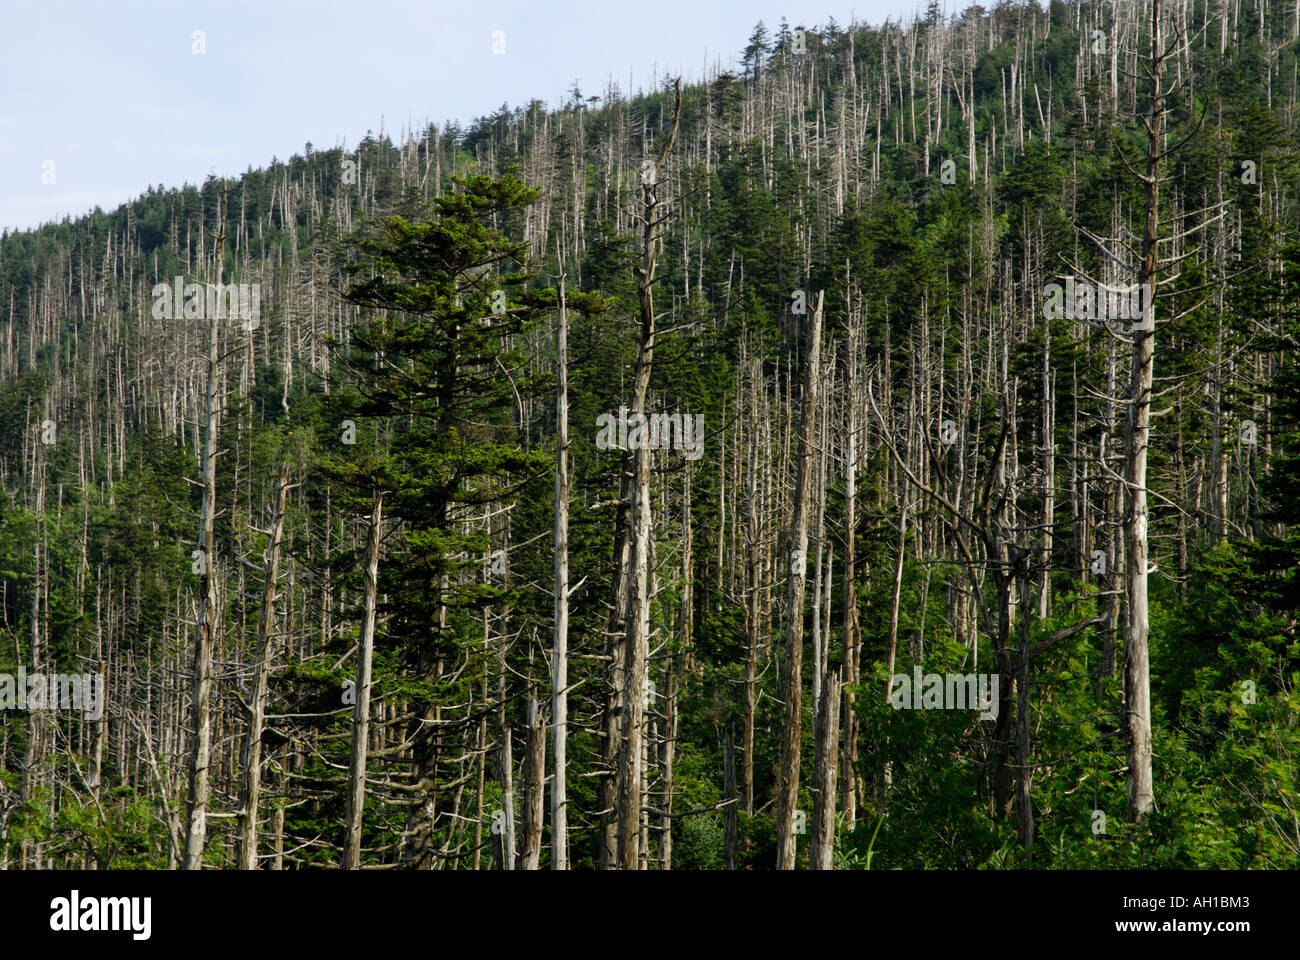 Dead Fraser Fir, Abies fraseri, alberi - vittime di Balsam Wooly Adelgid, Clingman's Dome, il Parco Nazionale di Great Smoky Mountains Foto Stock